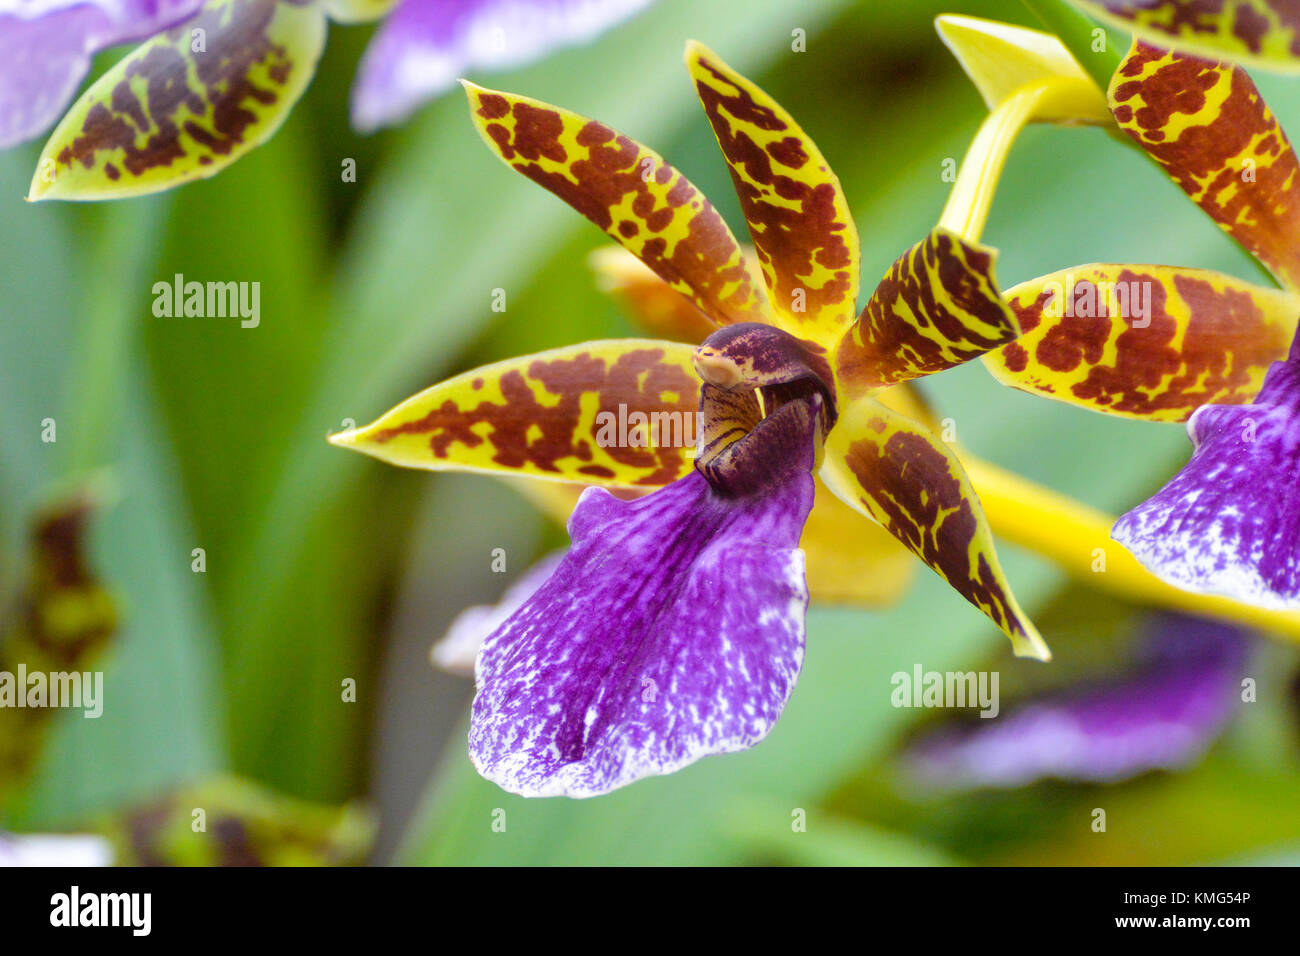 A close up of a zygopetalum orchid. Stock Photo